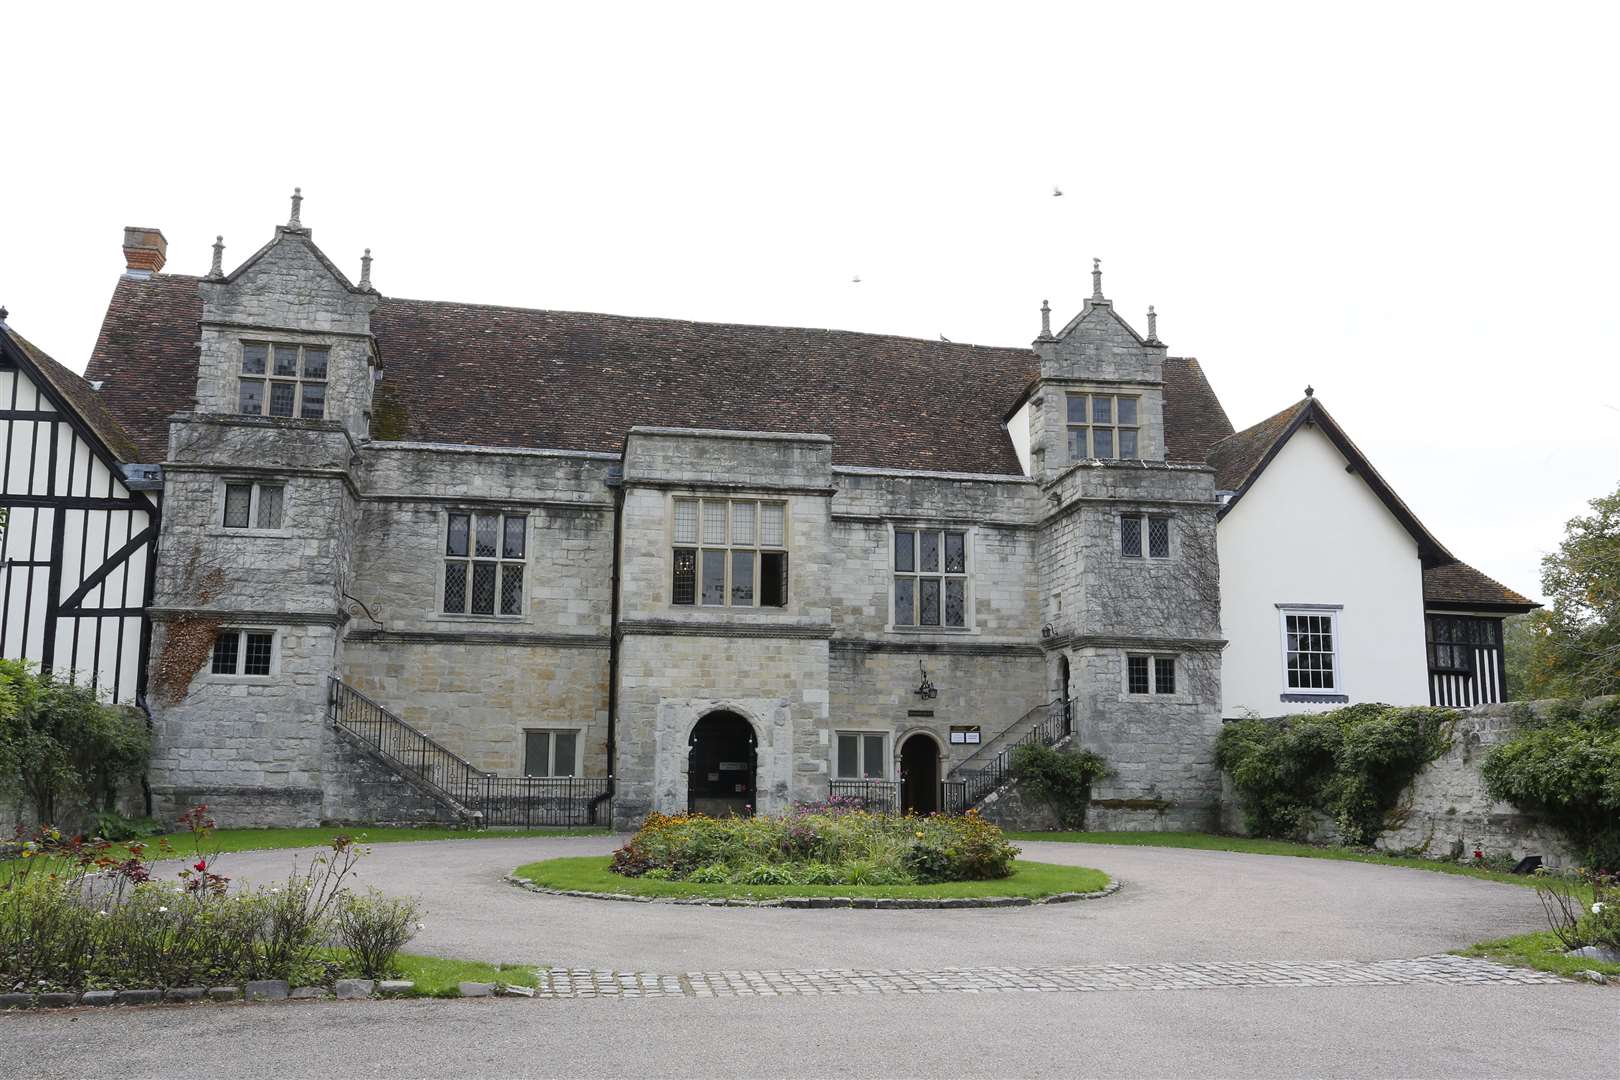 The inquest was heard at the Archbishop's Palace in Maidstone